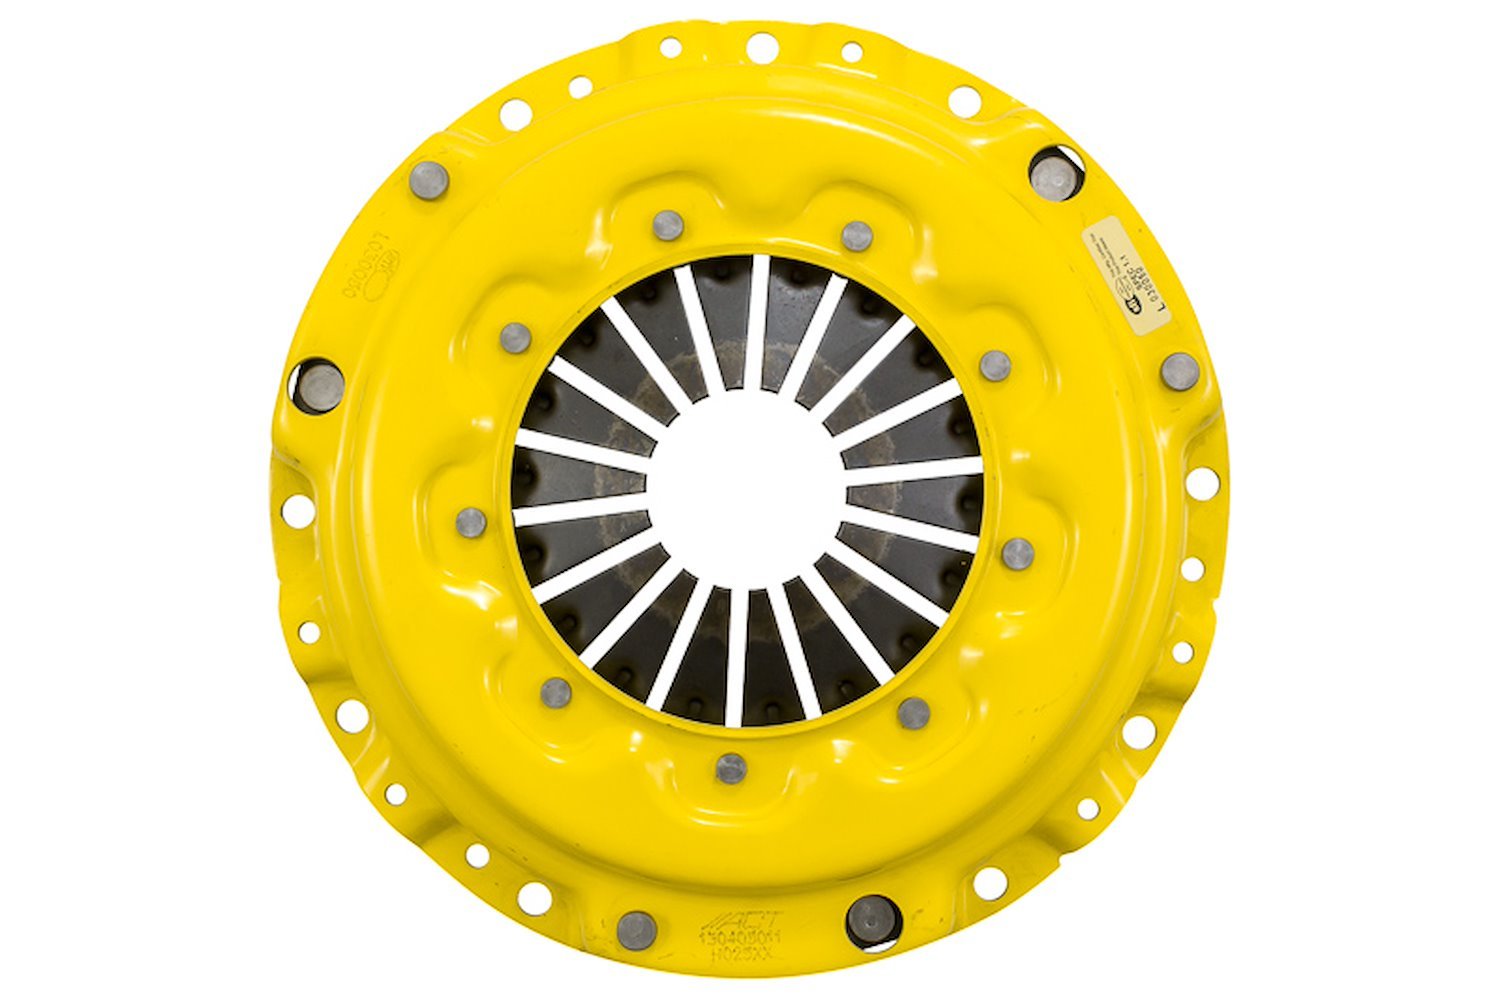 MaXX Xtreme Transmission Clutch Pressure Plate Fits Select